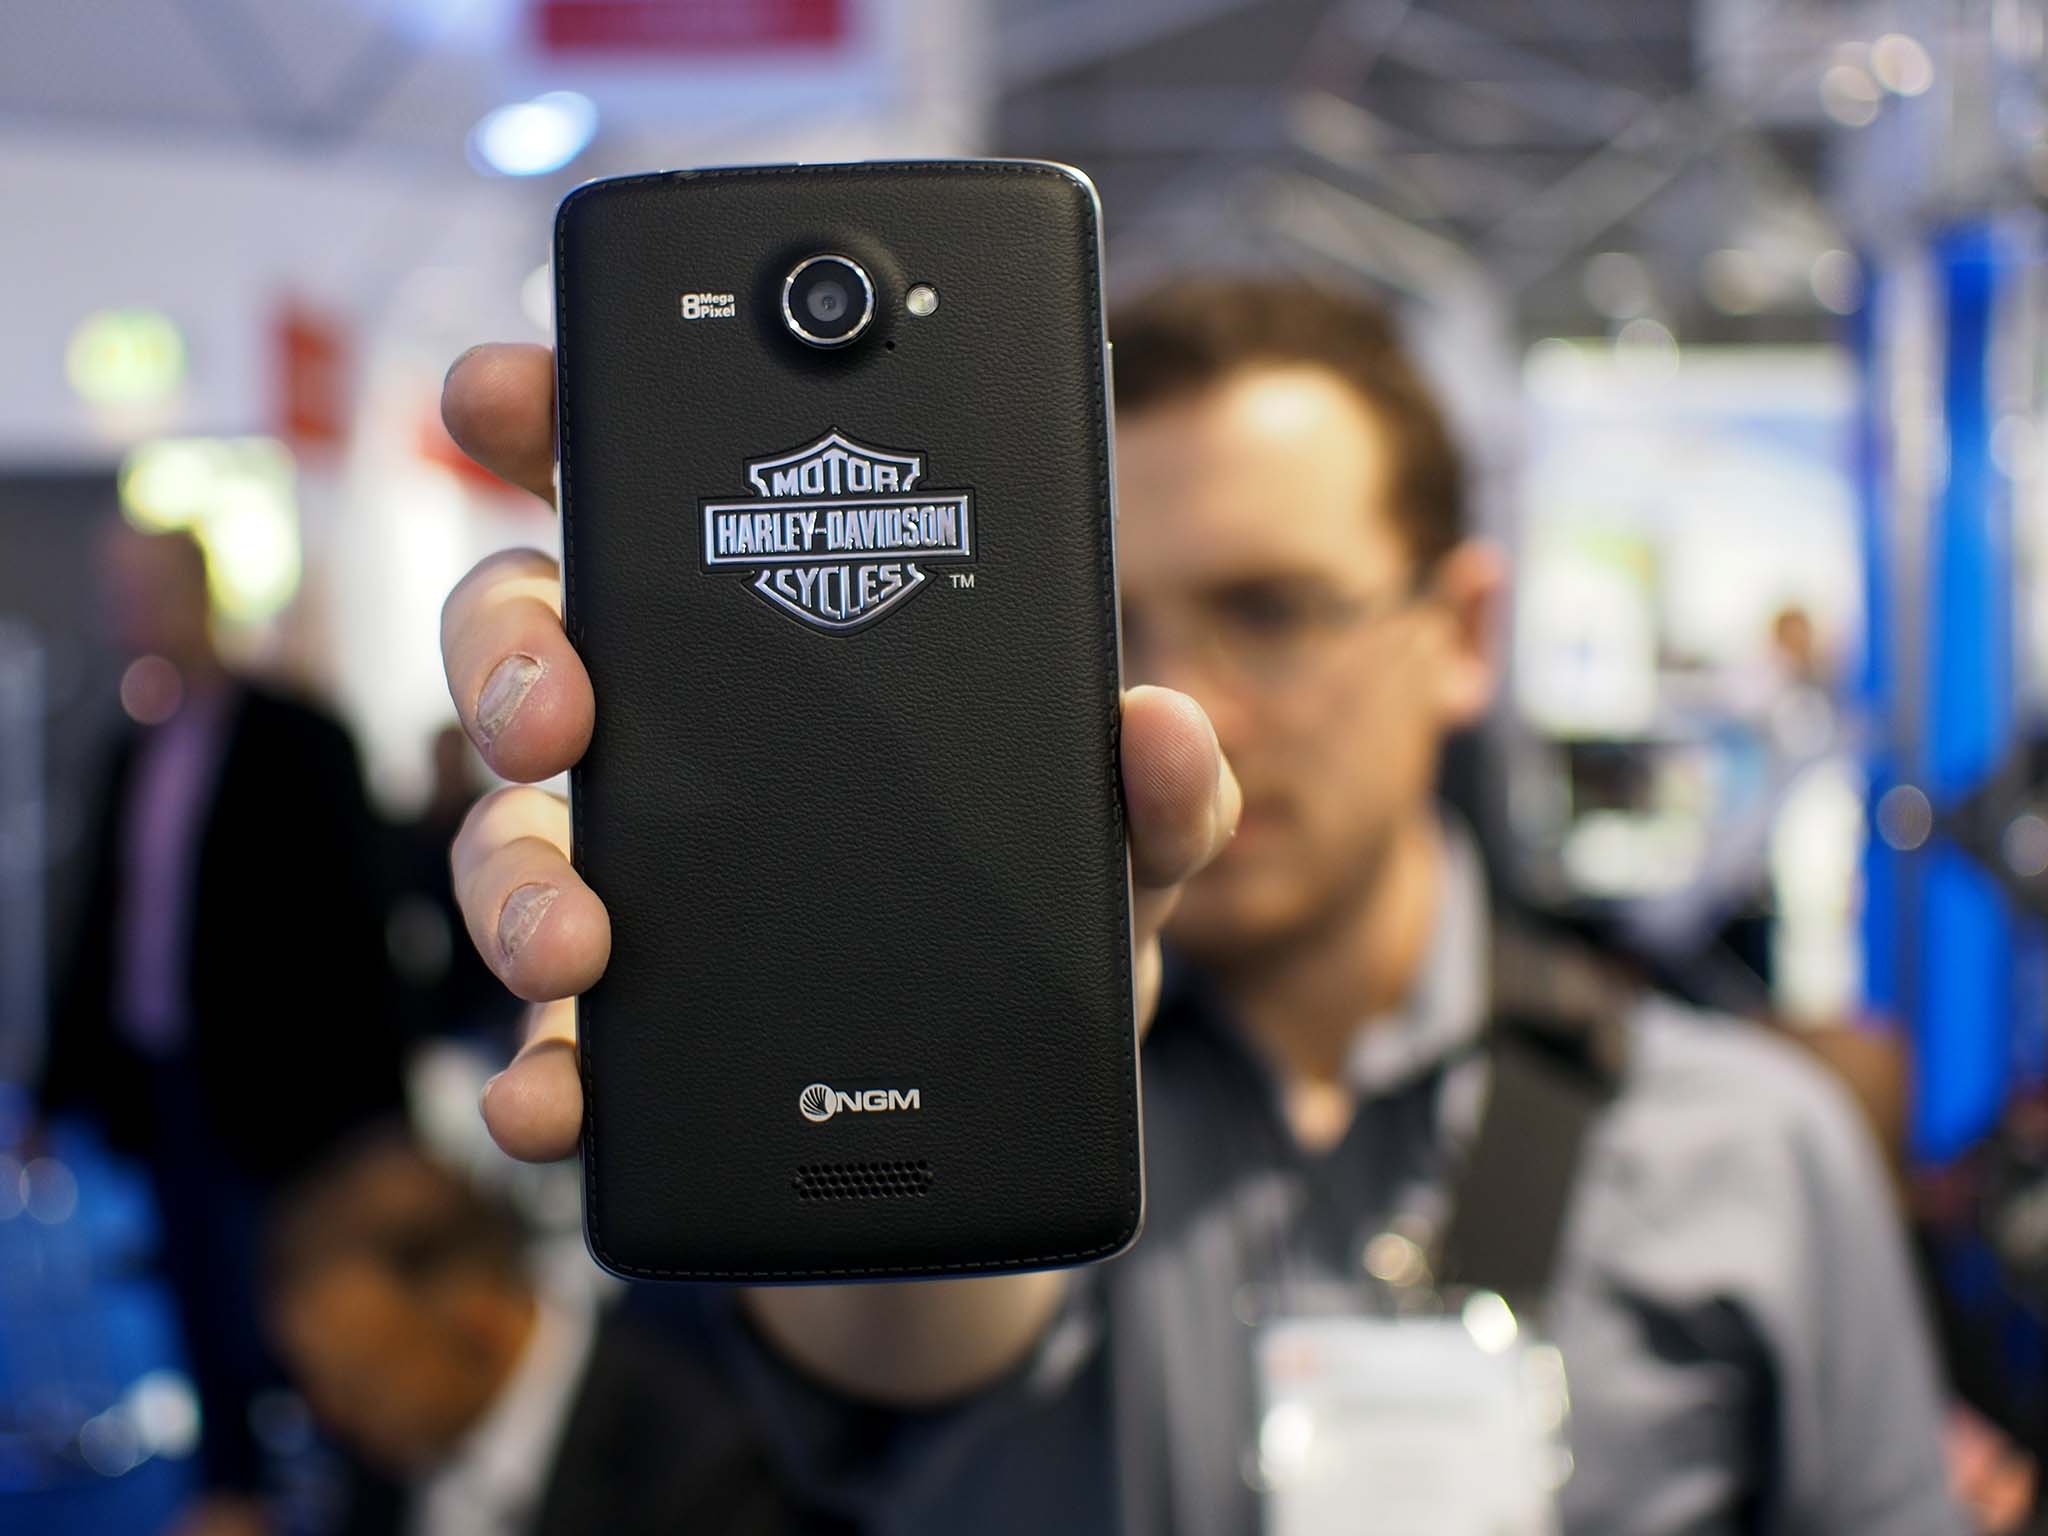 Hands-on with NGM's Harley Davidson-adorned Windows Phone